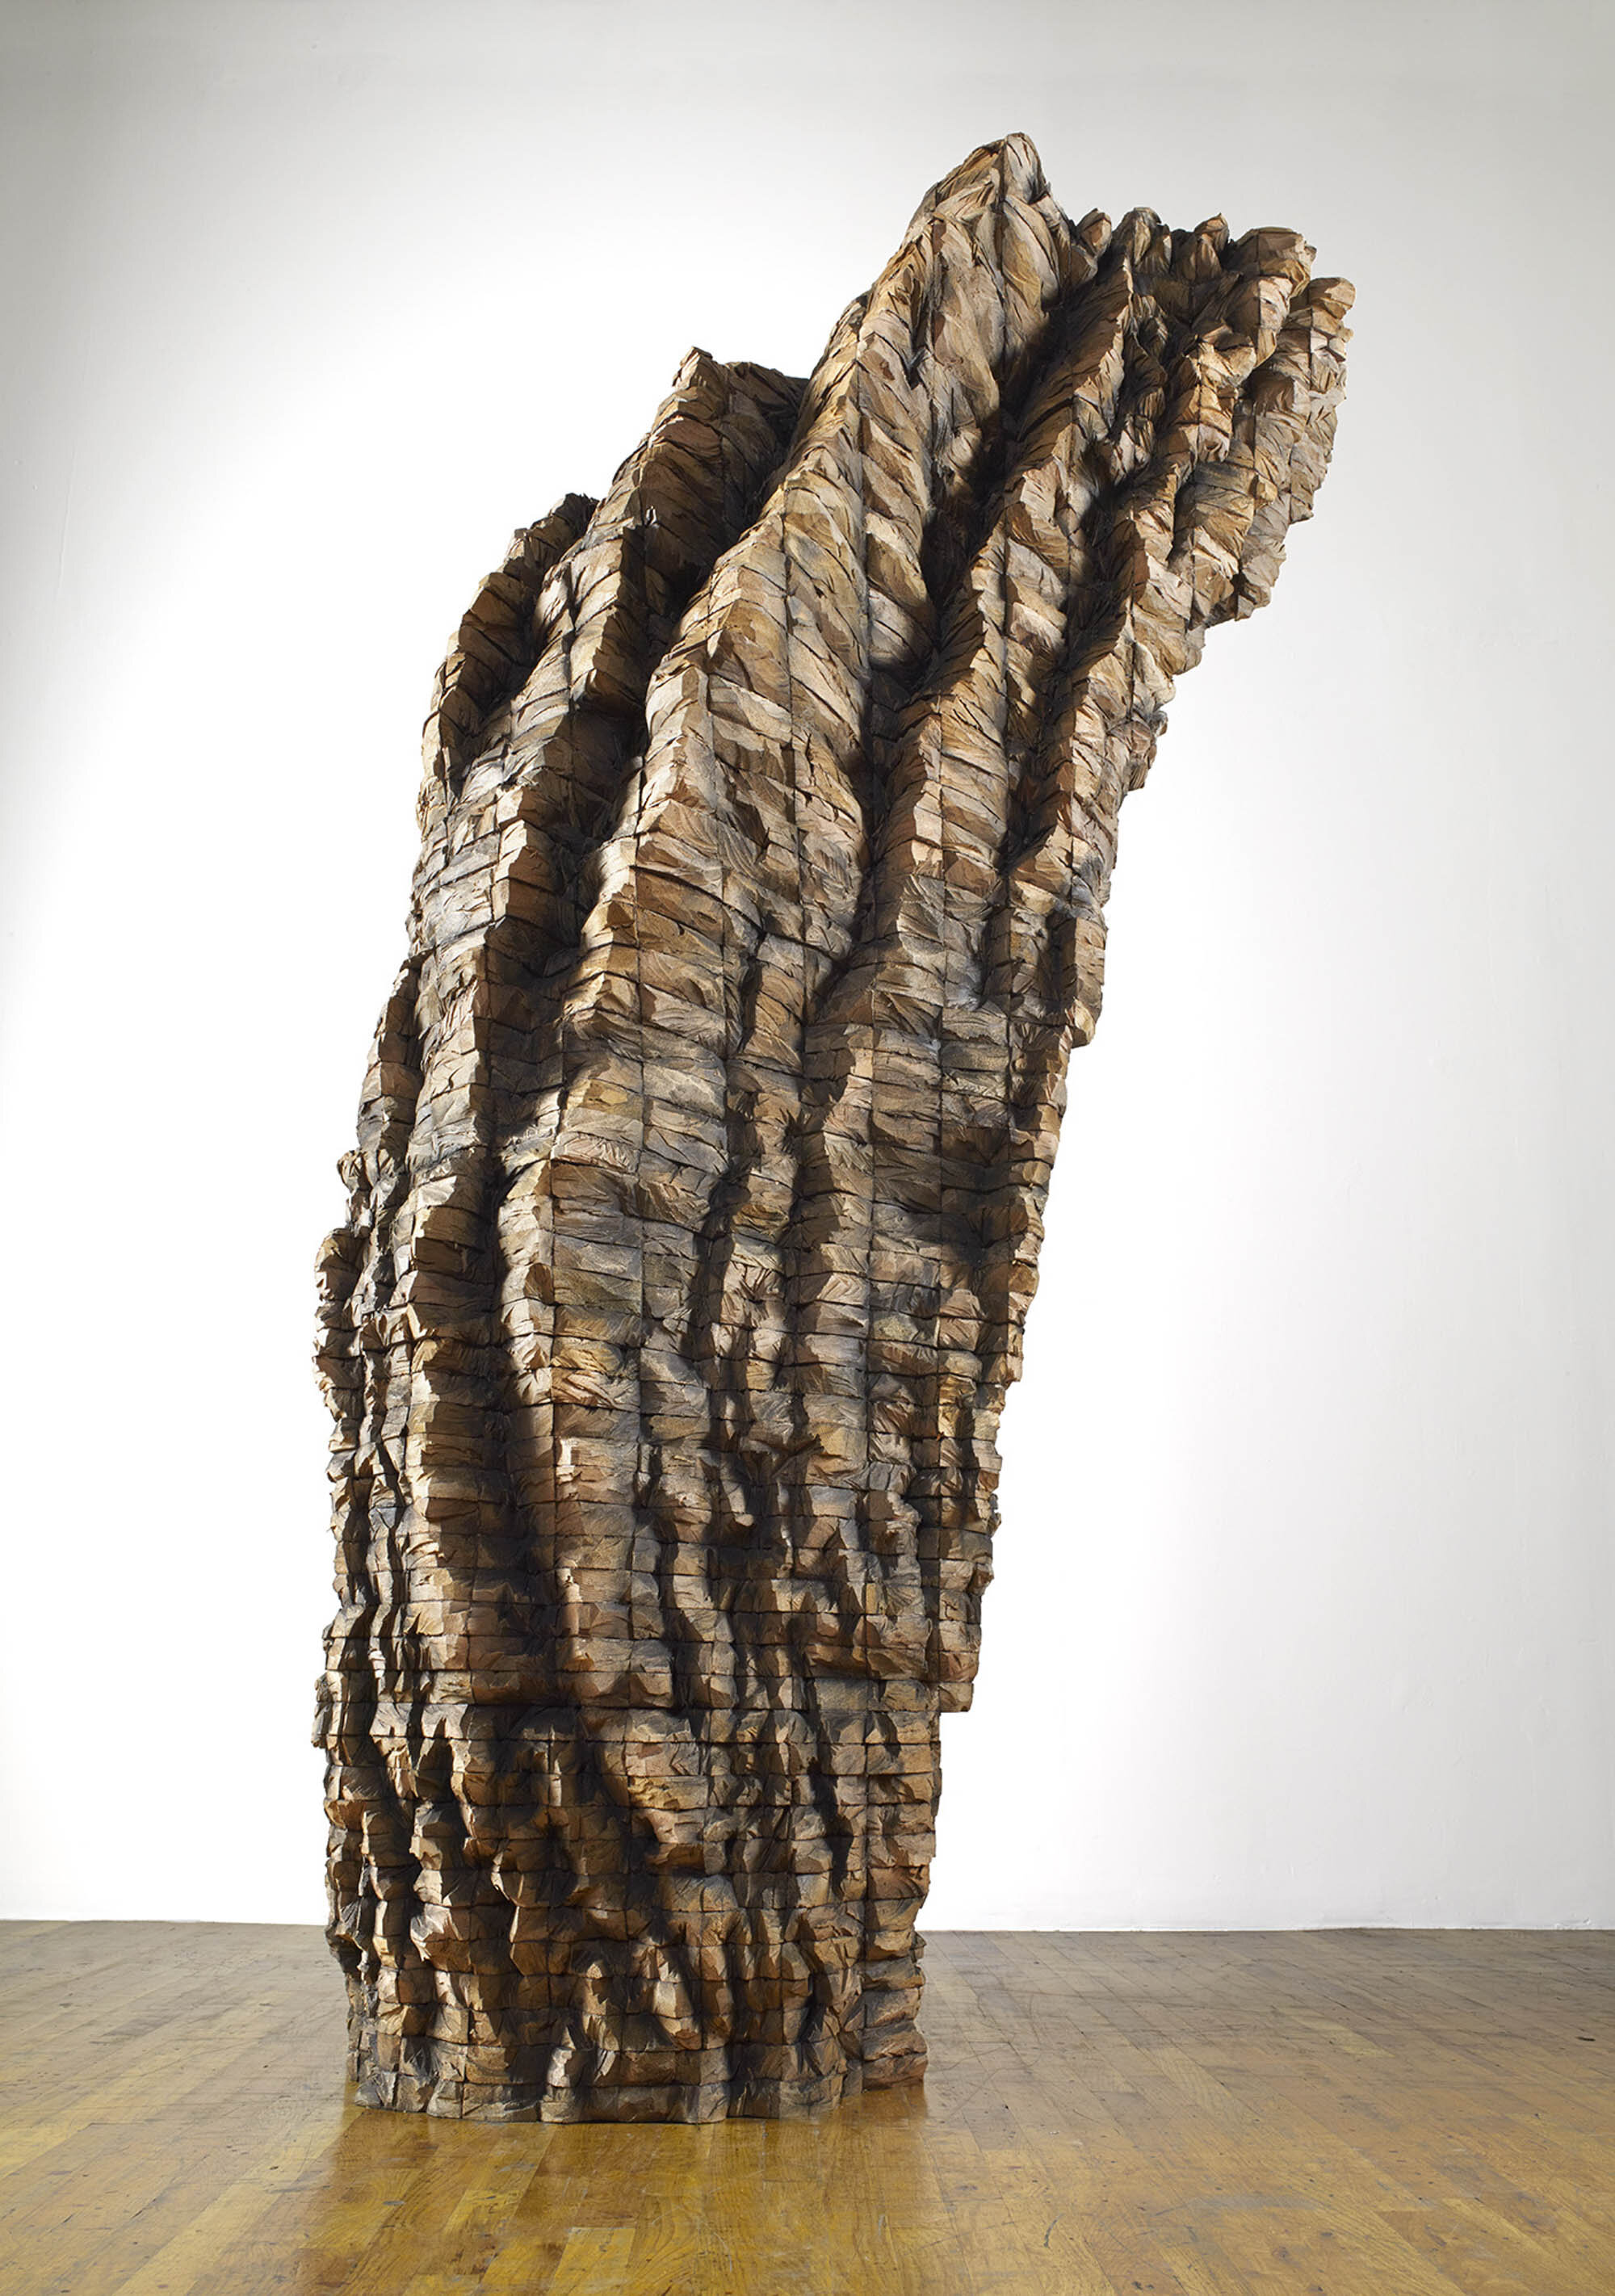       rześki , 2014 Cedar and graphite 104 x 58 x 52 in.    MORE IMAGES   Galerie Lelong &amp; Co.  